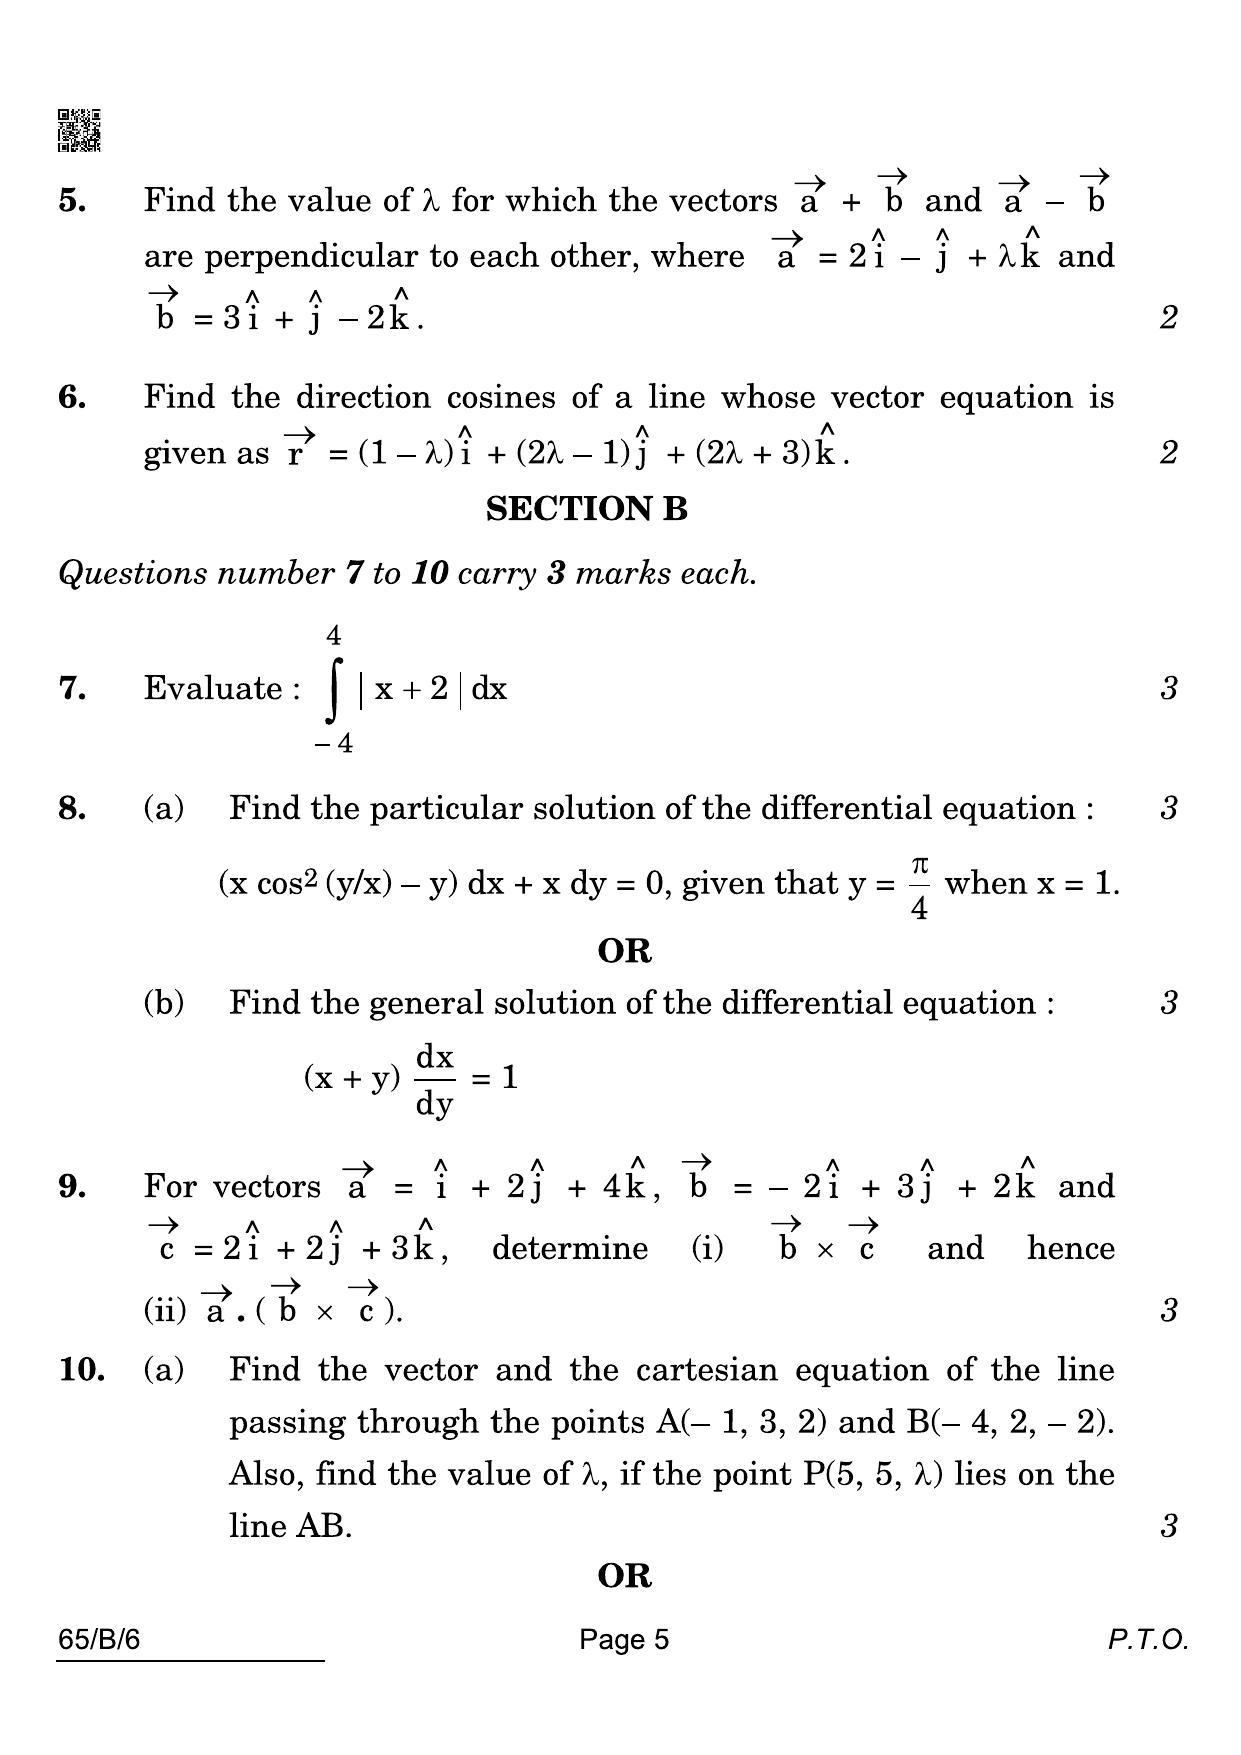 CBSE Class 12 65-B-6 Maths Blind 2022 Compartment Question Paper - Page 5